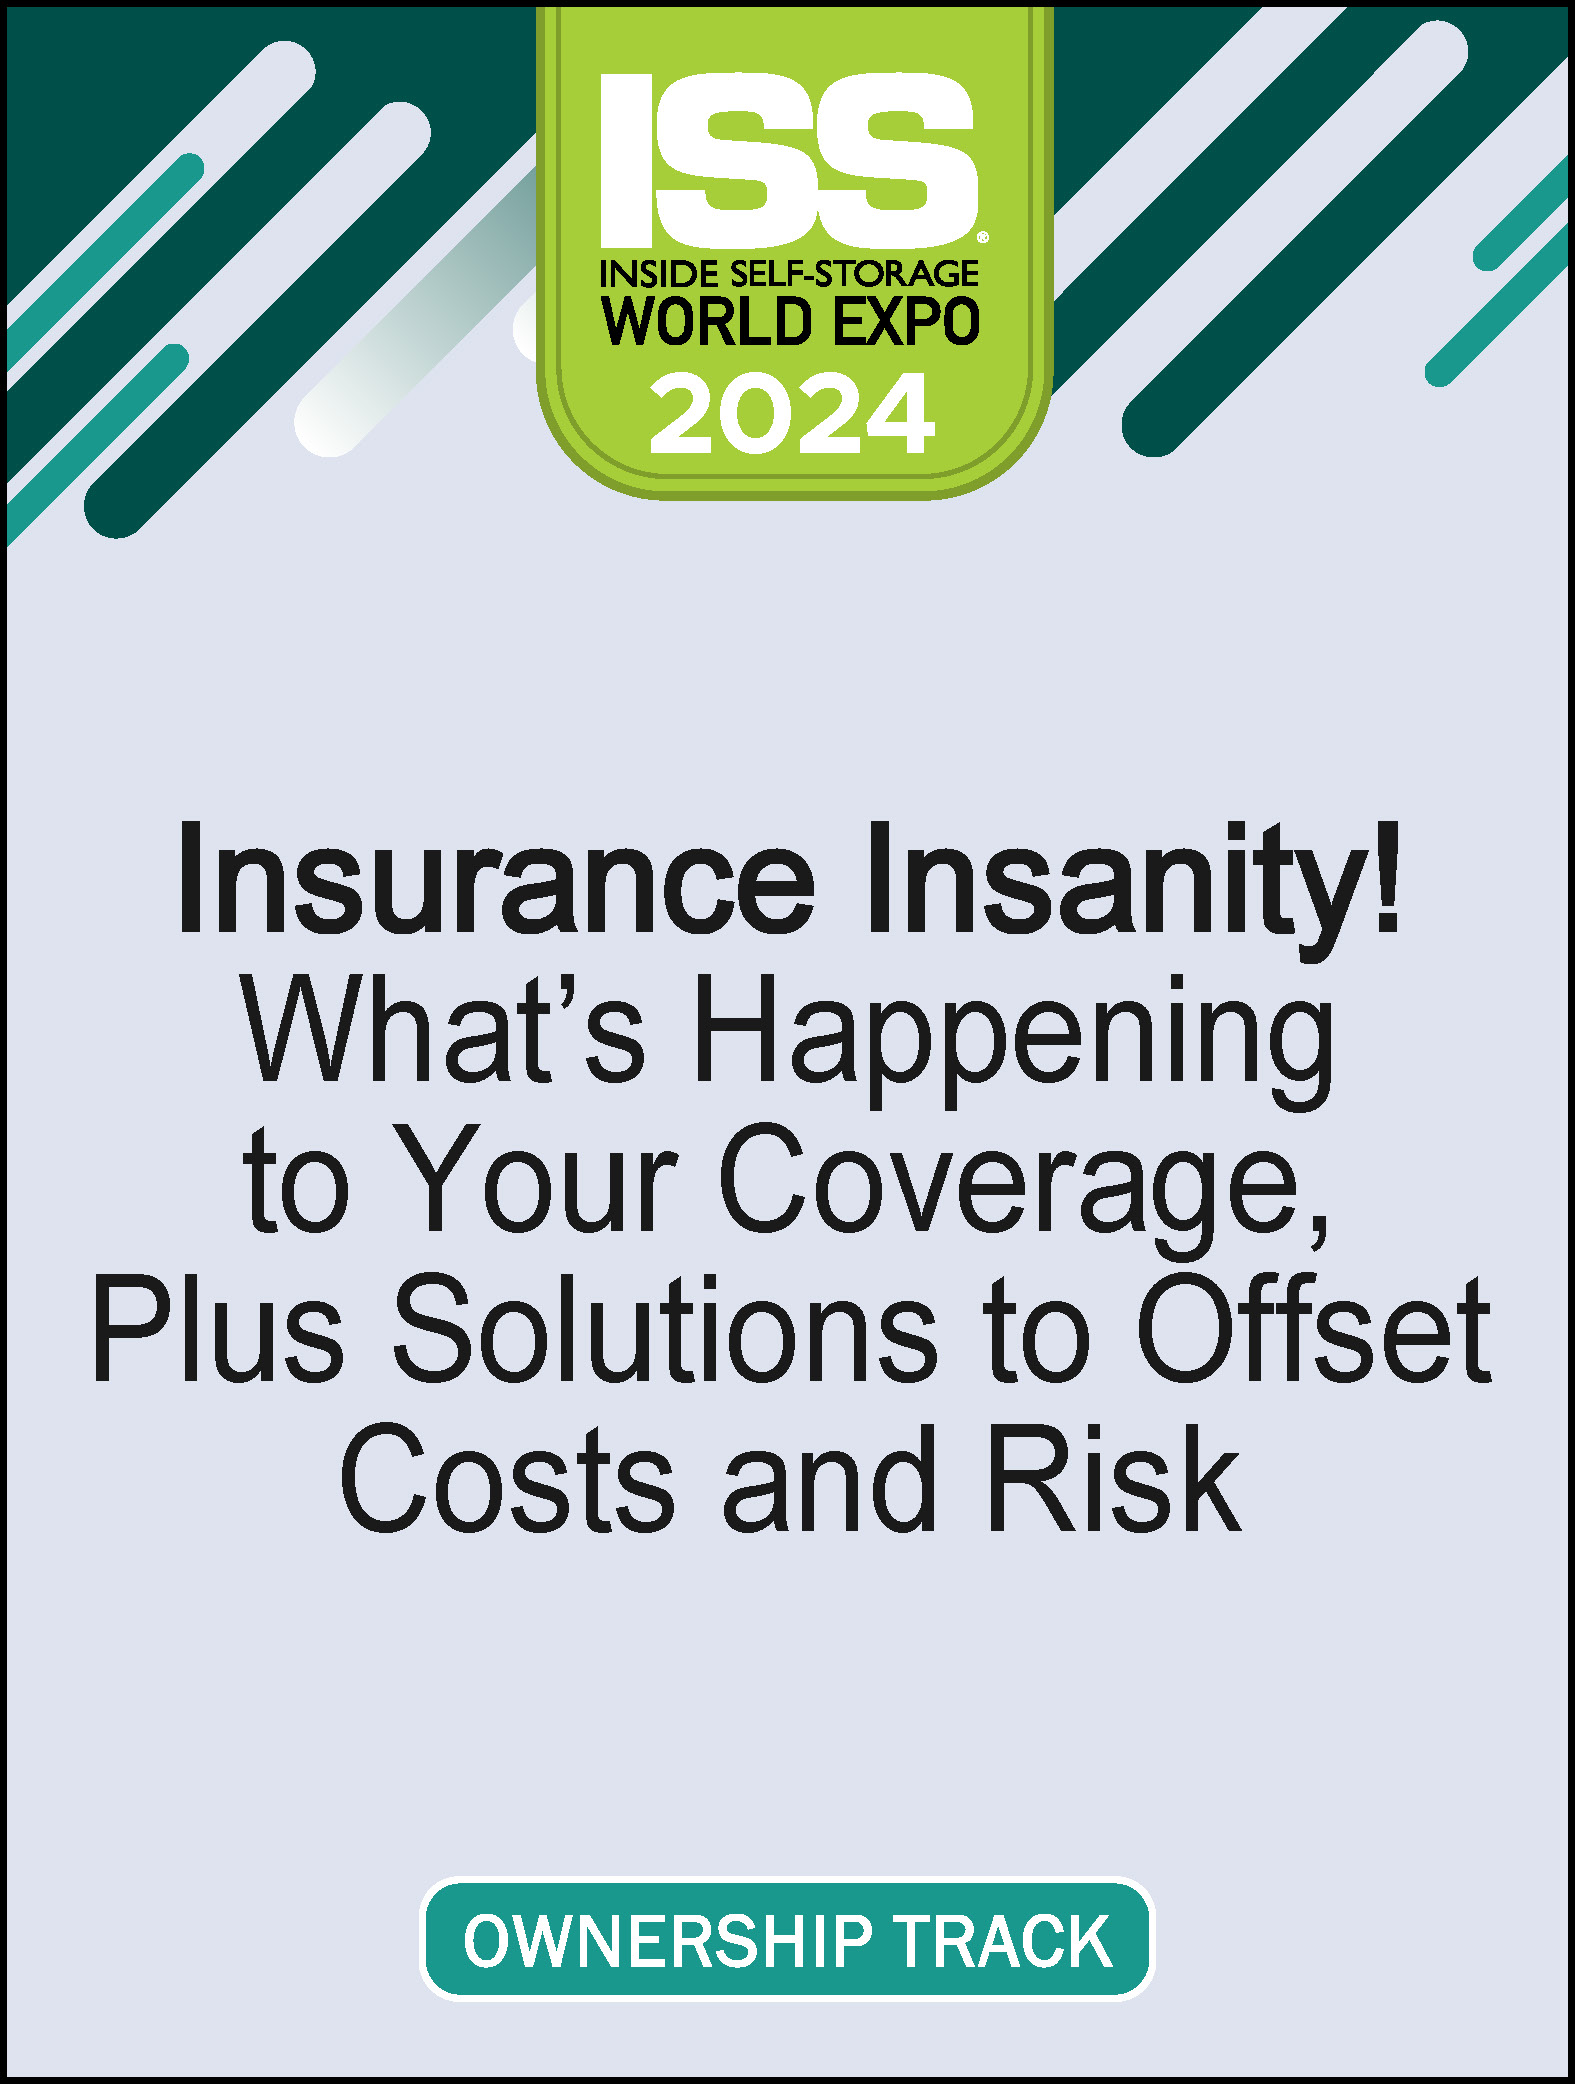 Video Pre-Order PDF - Insurance Insanity! What’s Happening to Your Coverage, Plus Solutions to Offset Costs and Risk